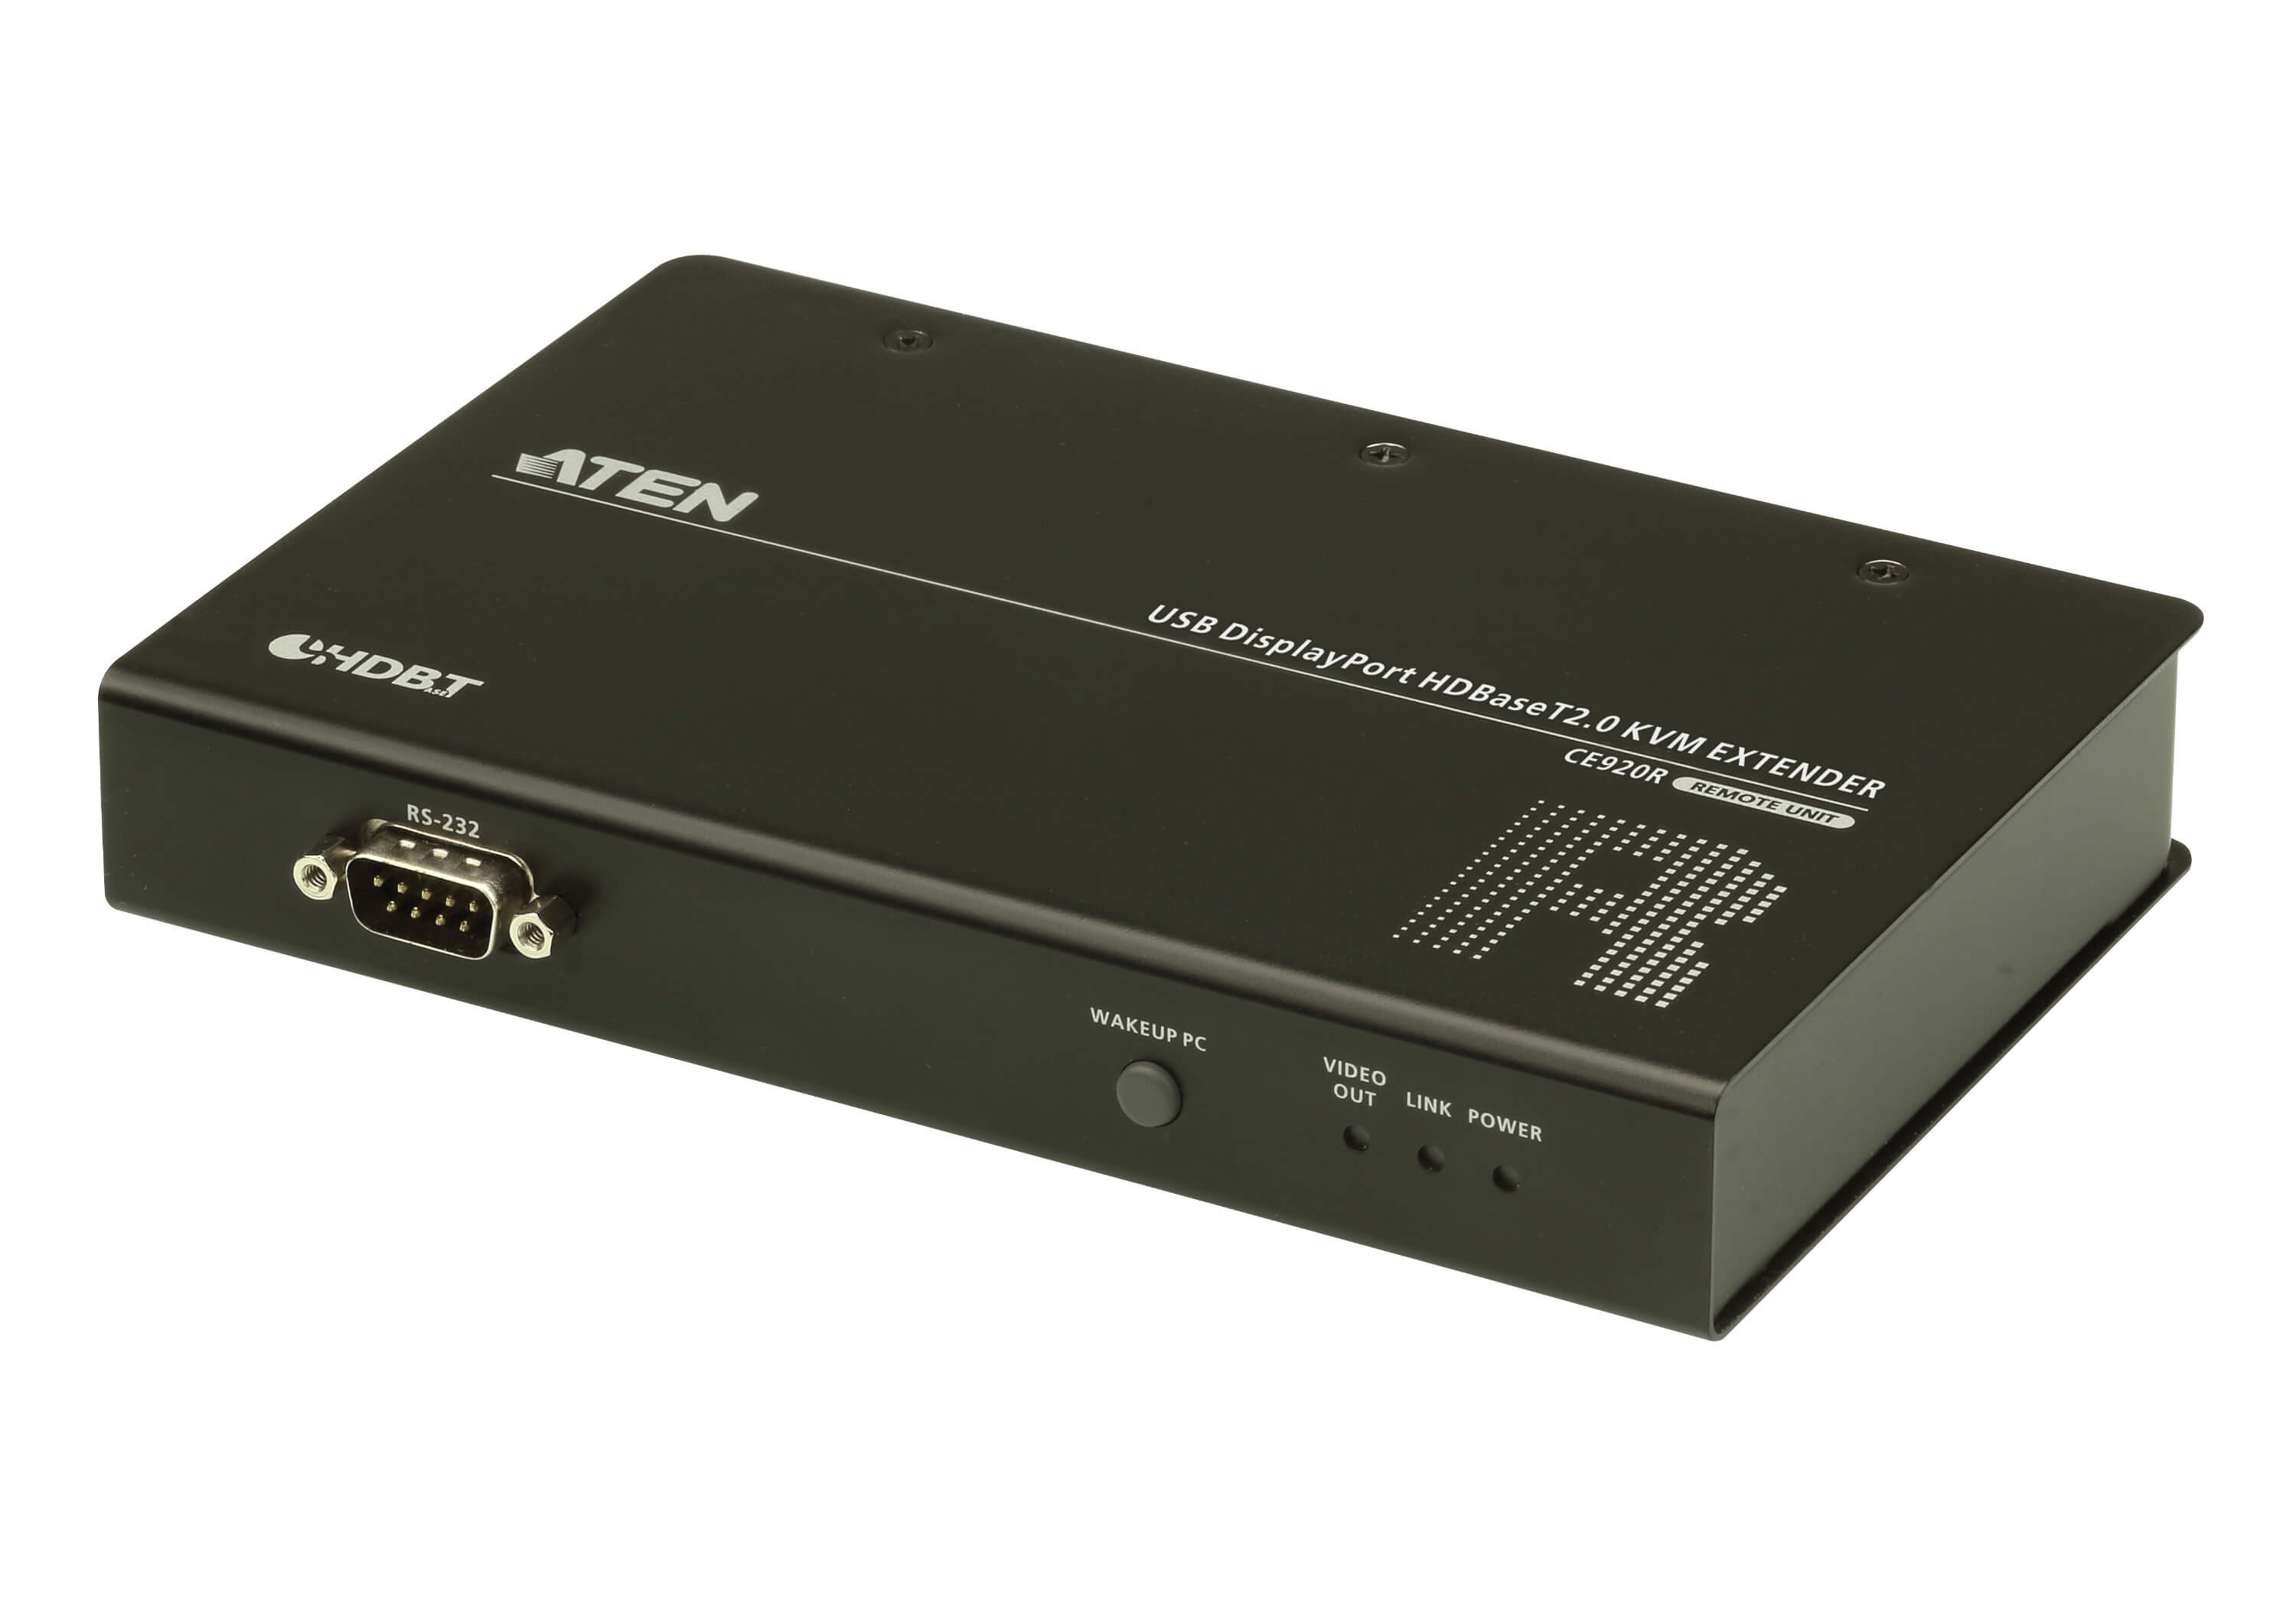 CE920R-ATA-G  USB DisplayPort HDBaseT? 2.0 KVM Extender (Remote Unit) (4K up to 100m) with USB Peripheral Support